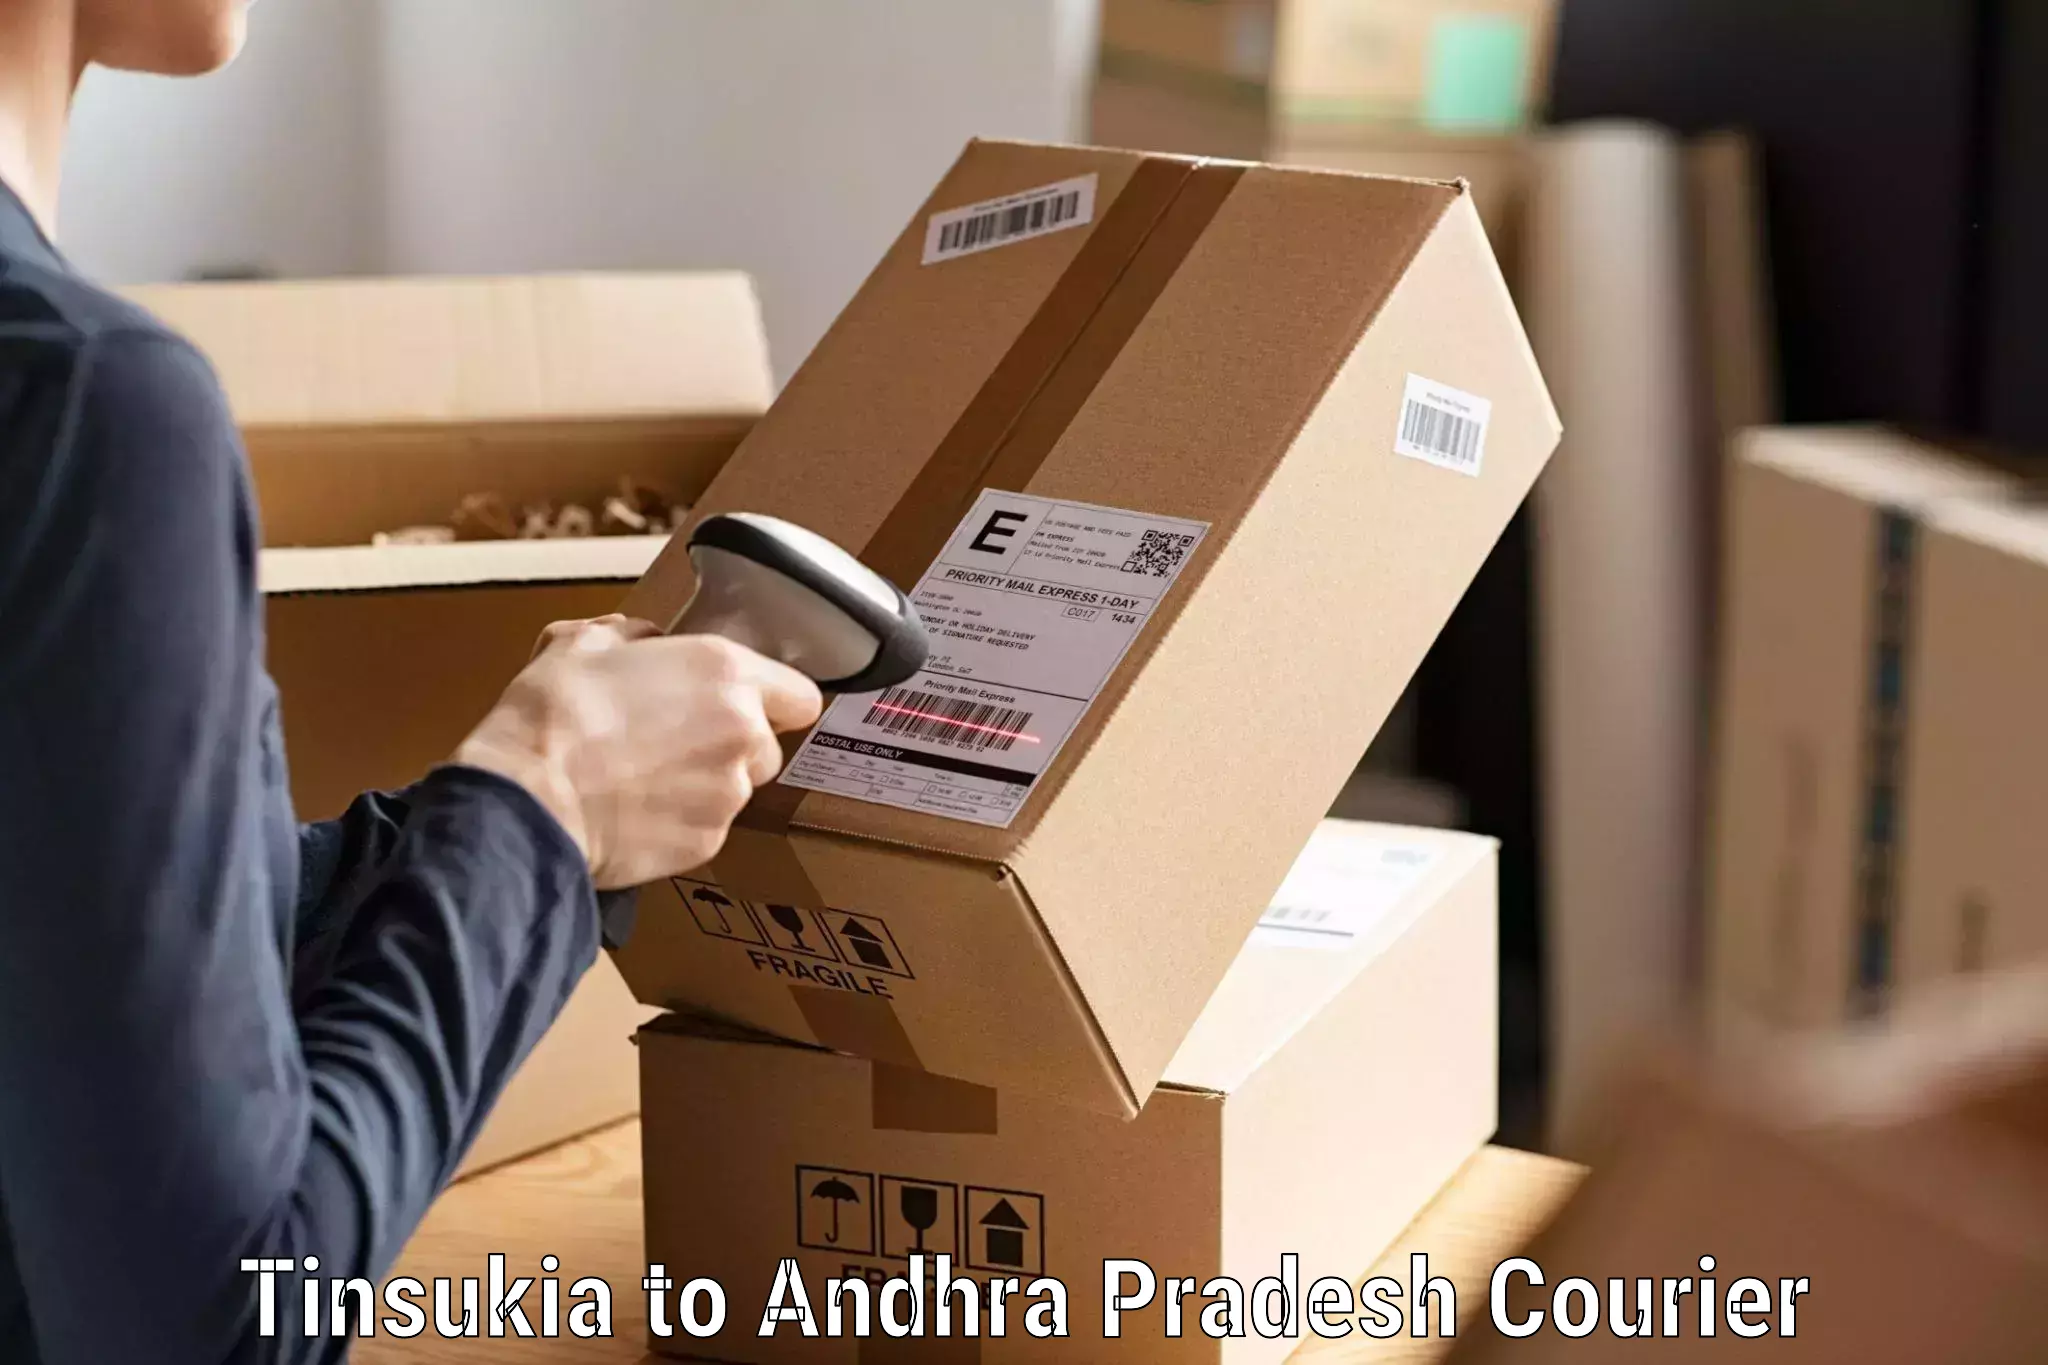 State-of-the-art courier technology Tinsukia to Visakhapatnam Port